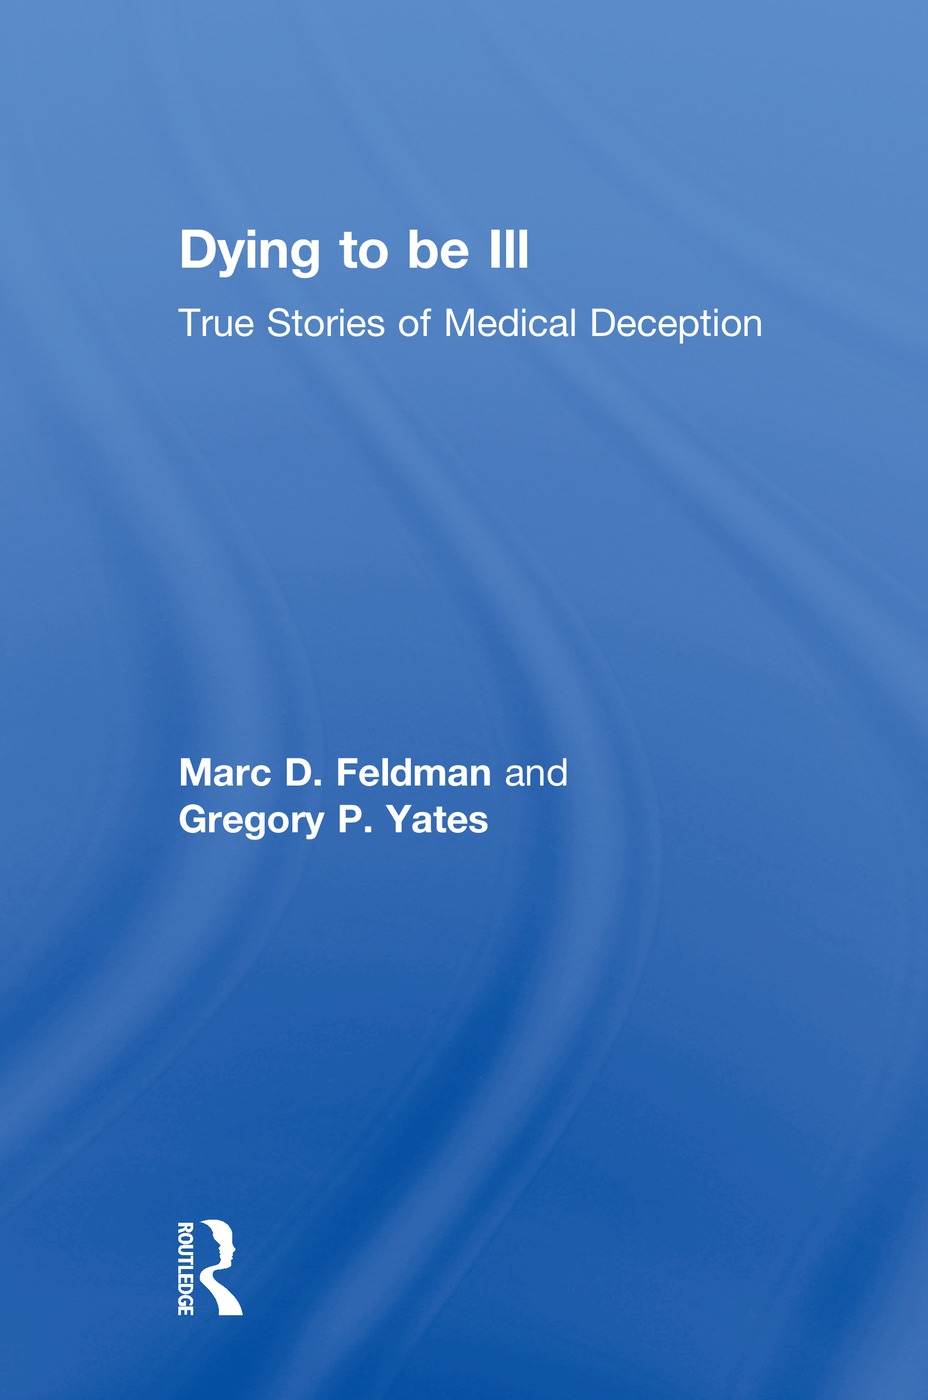 Dying to Be Ill: True Stories of Medical Deception